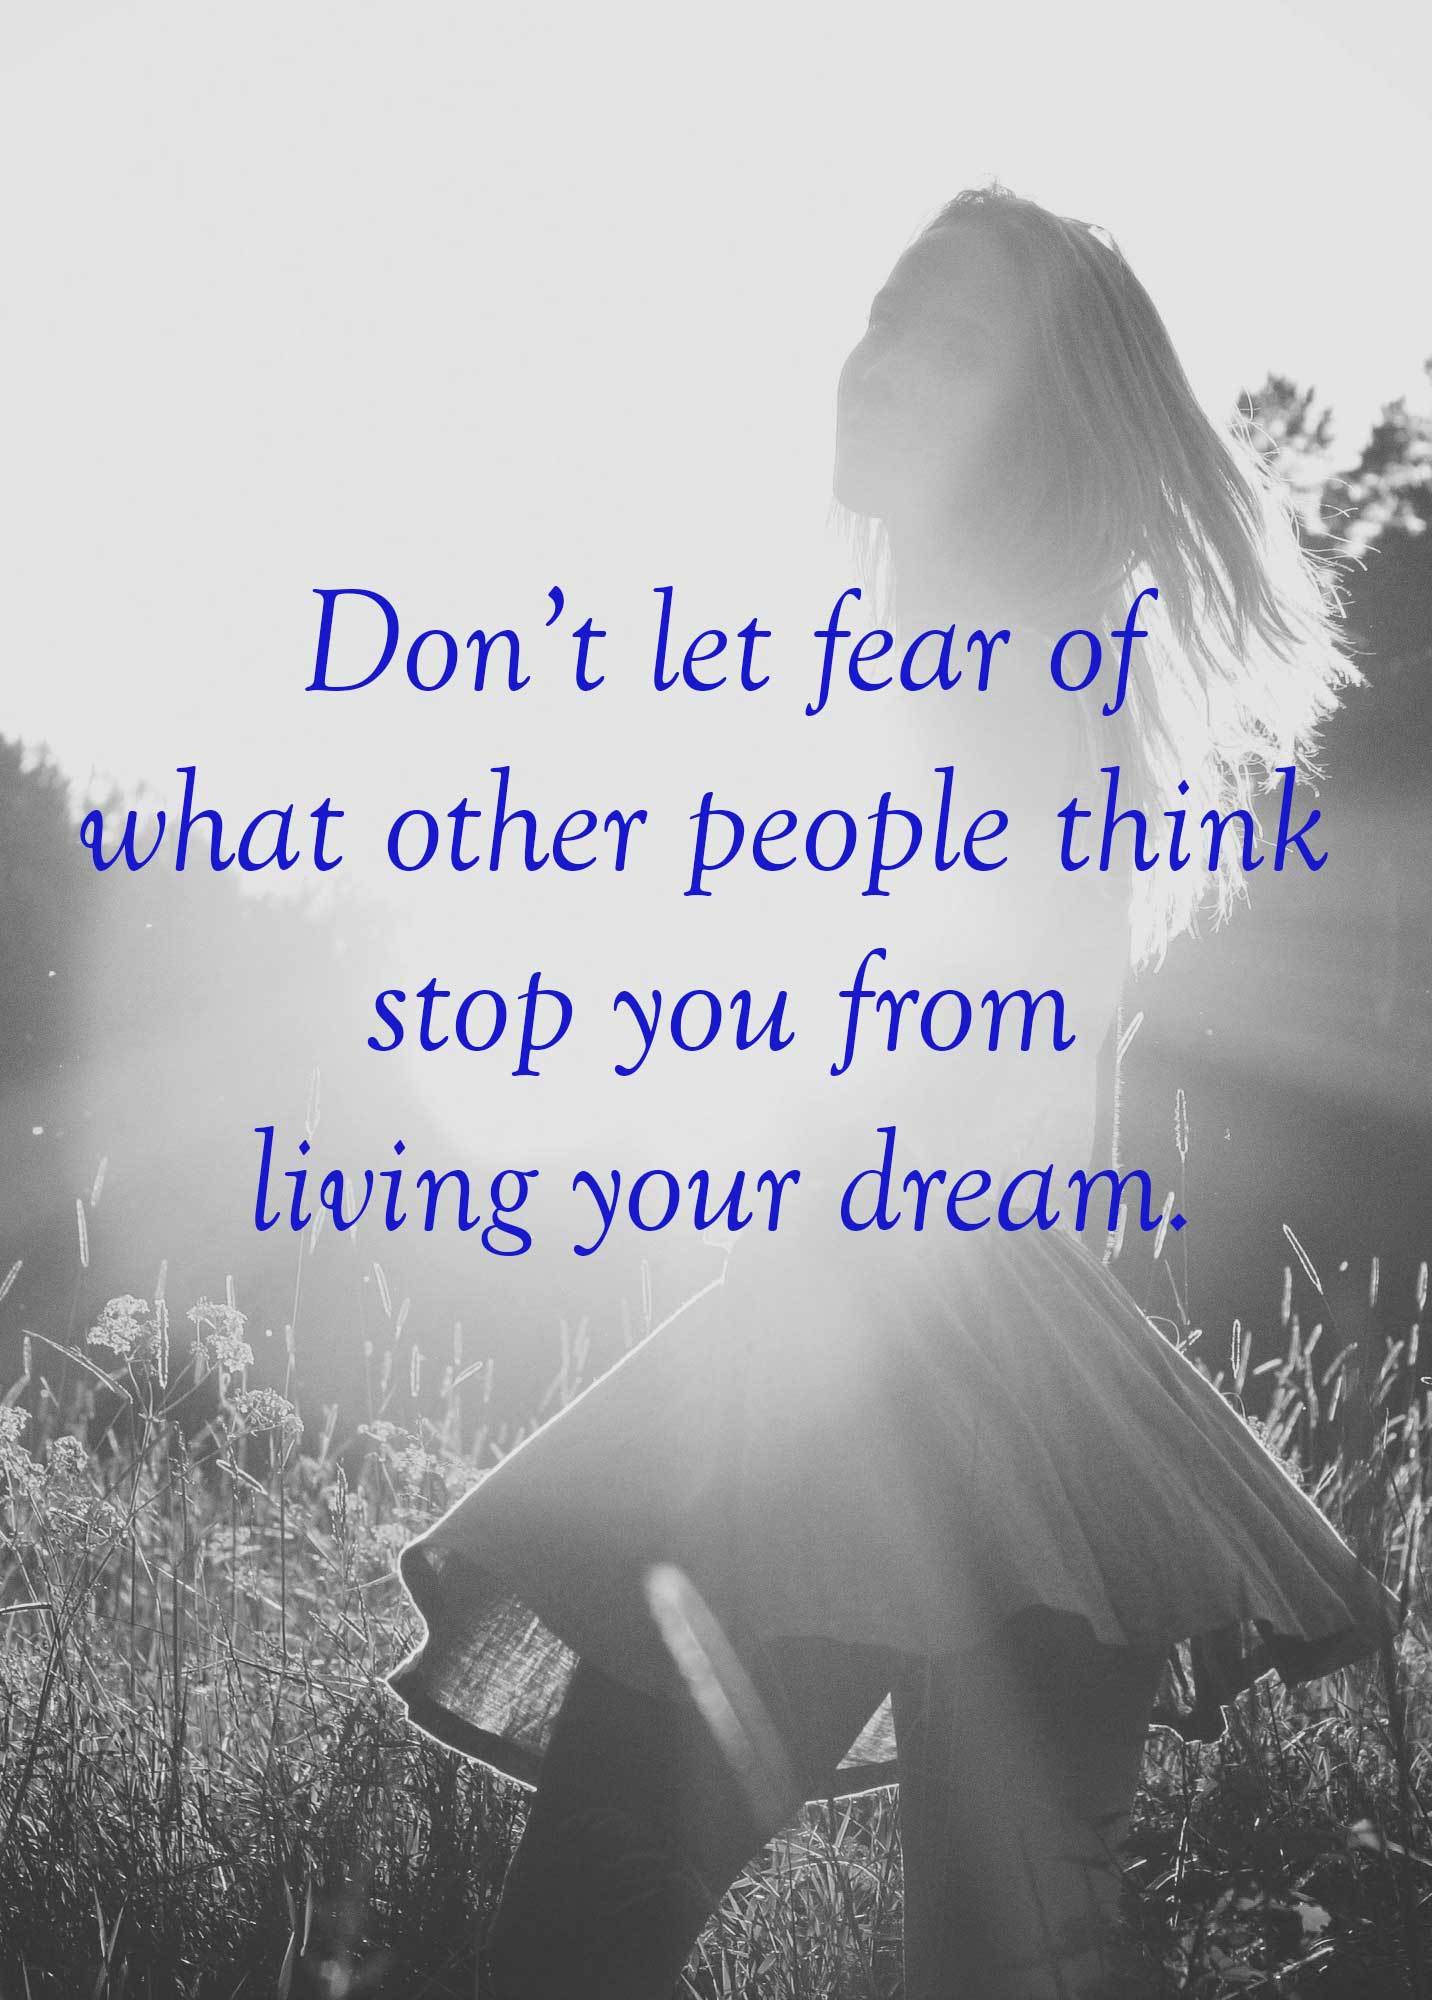 Don’t let fear of what other people think stop you from living your dream.